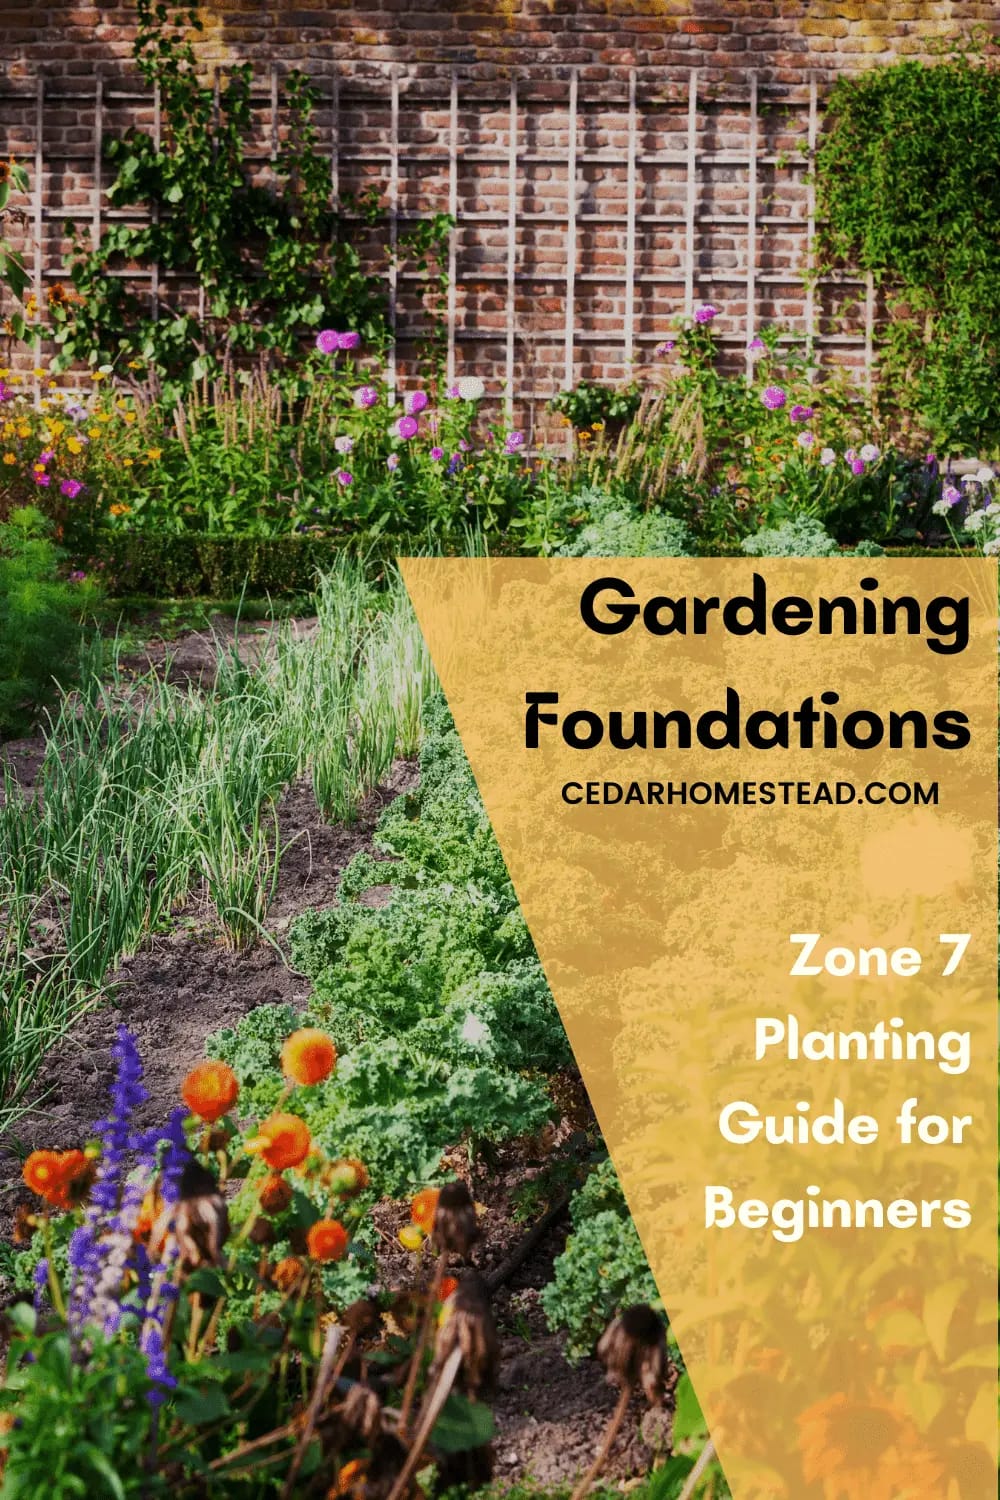 The Beginner’s Guide to Zone 7 Planting Cedar Homestead